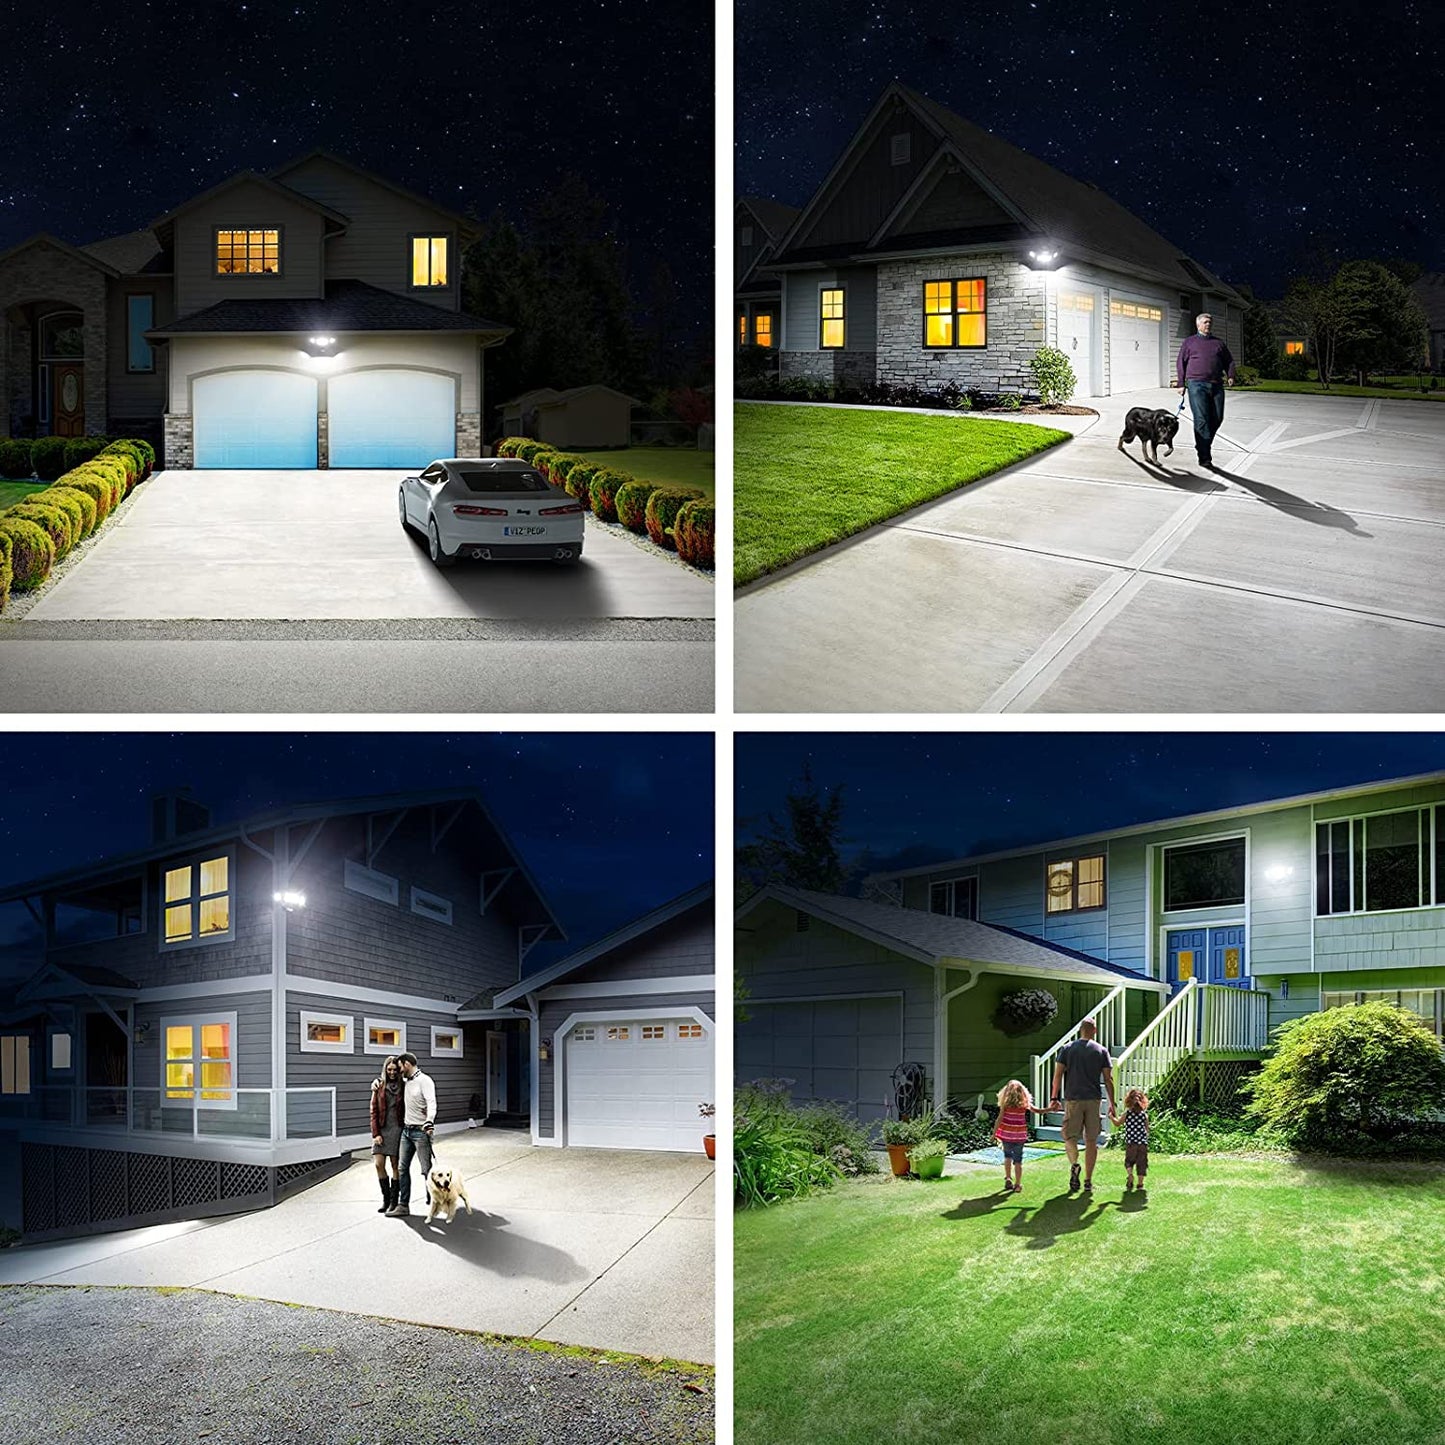 80W LED Security Light with Motion Sensor